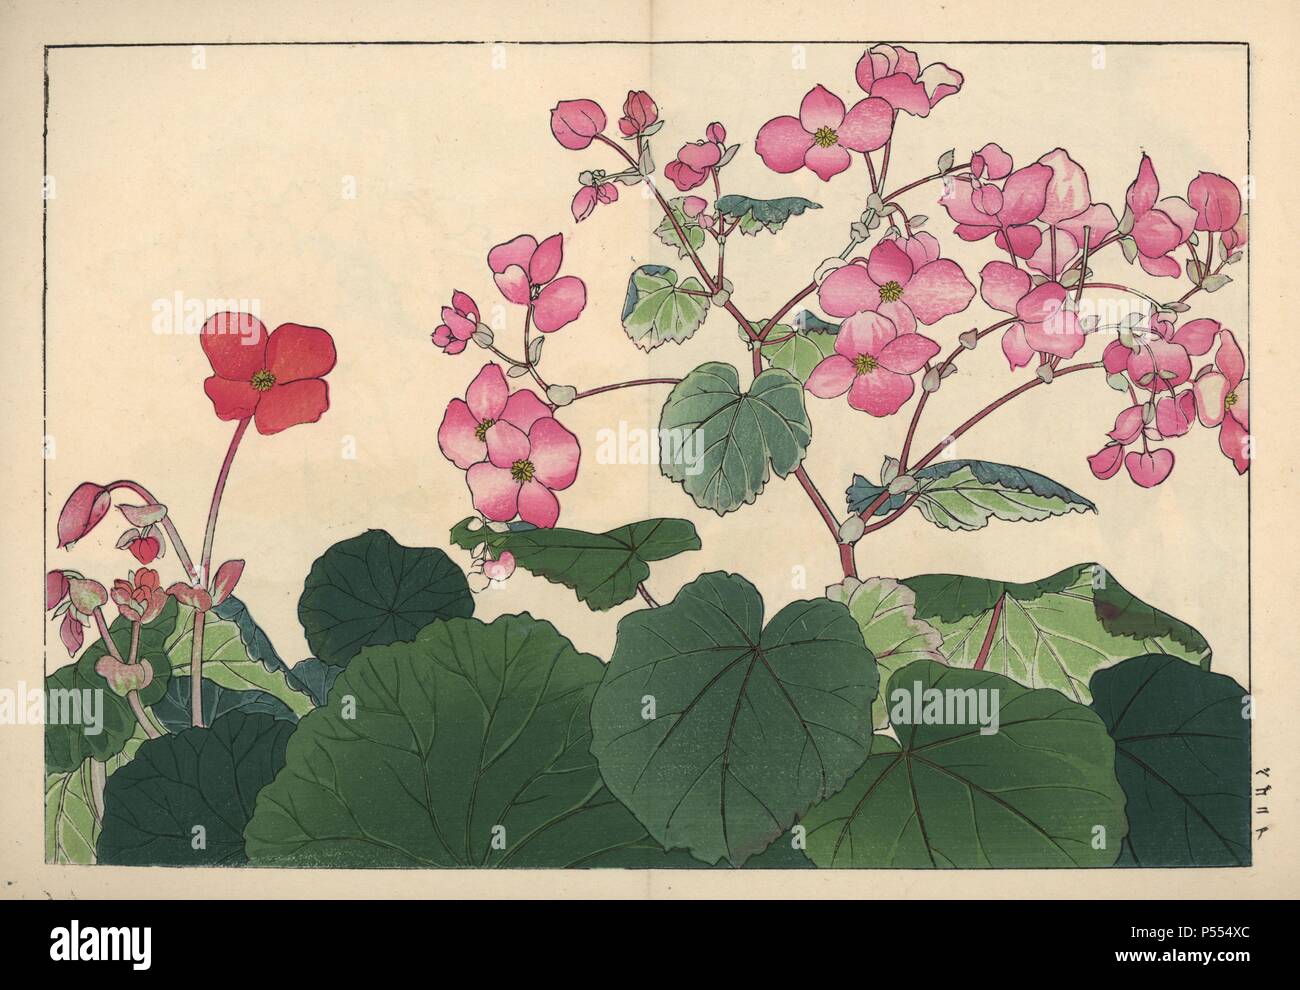 Begonia varieties. Handcoloured woodblock print from Konan Tanigami's 'Seiyou Sokazufu' (Pictorial Album of Western Plants and Flowers: Autumn Winter), Unsodo, Kyoto, 1917. Tanigami (1879-1928) depicted 125 varieties of garden plants through the four seasons. Stock Photo